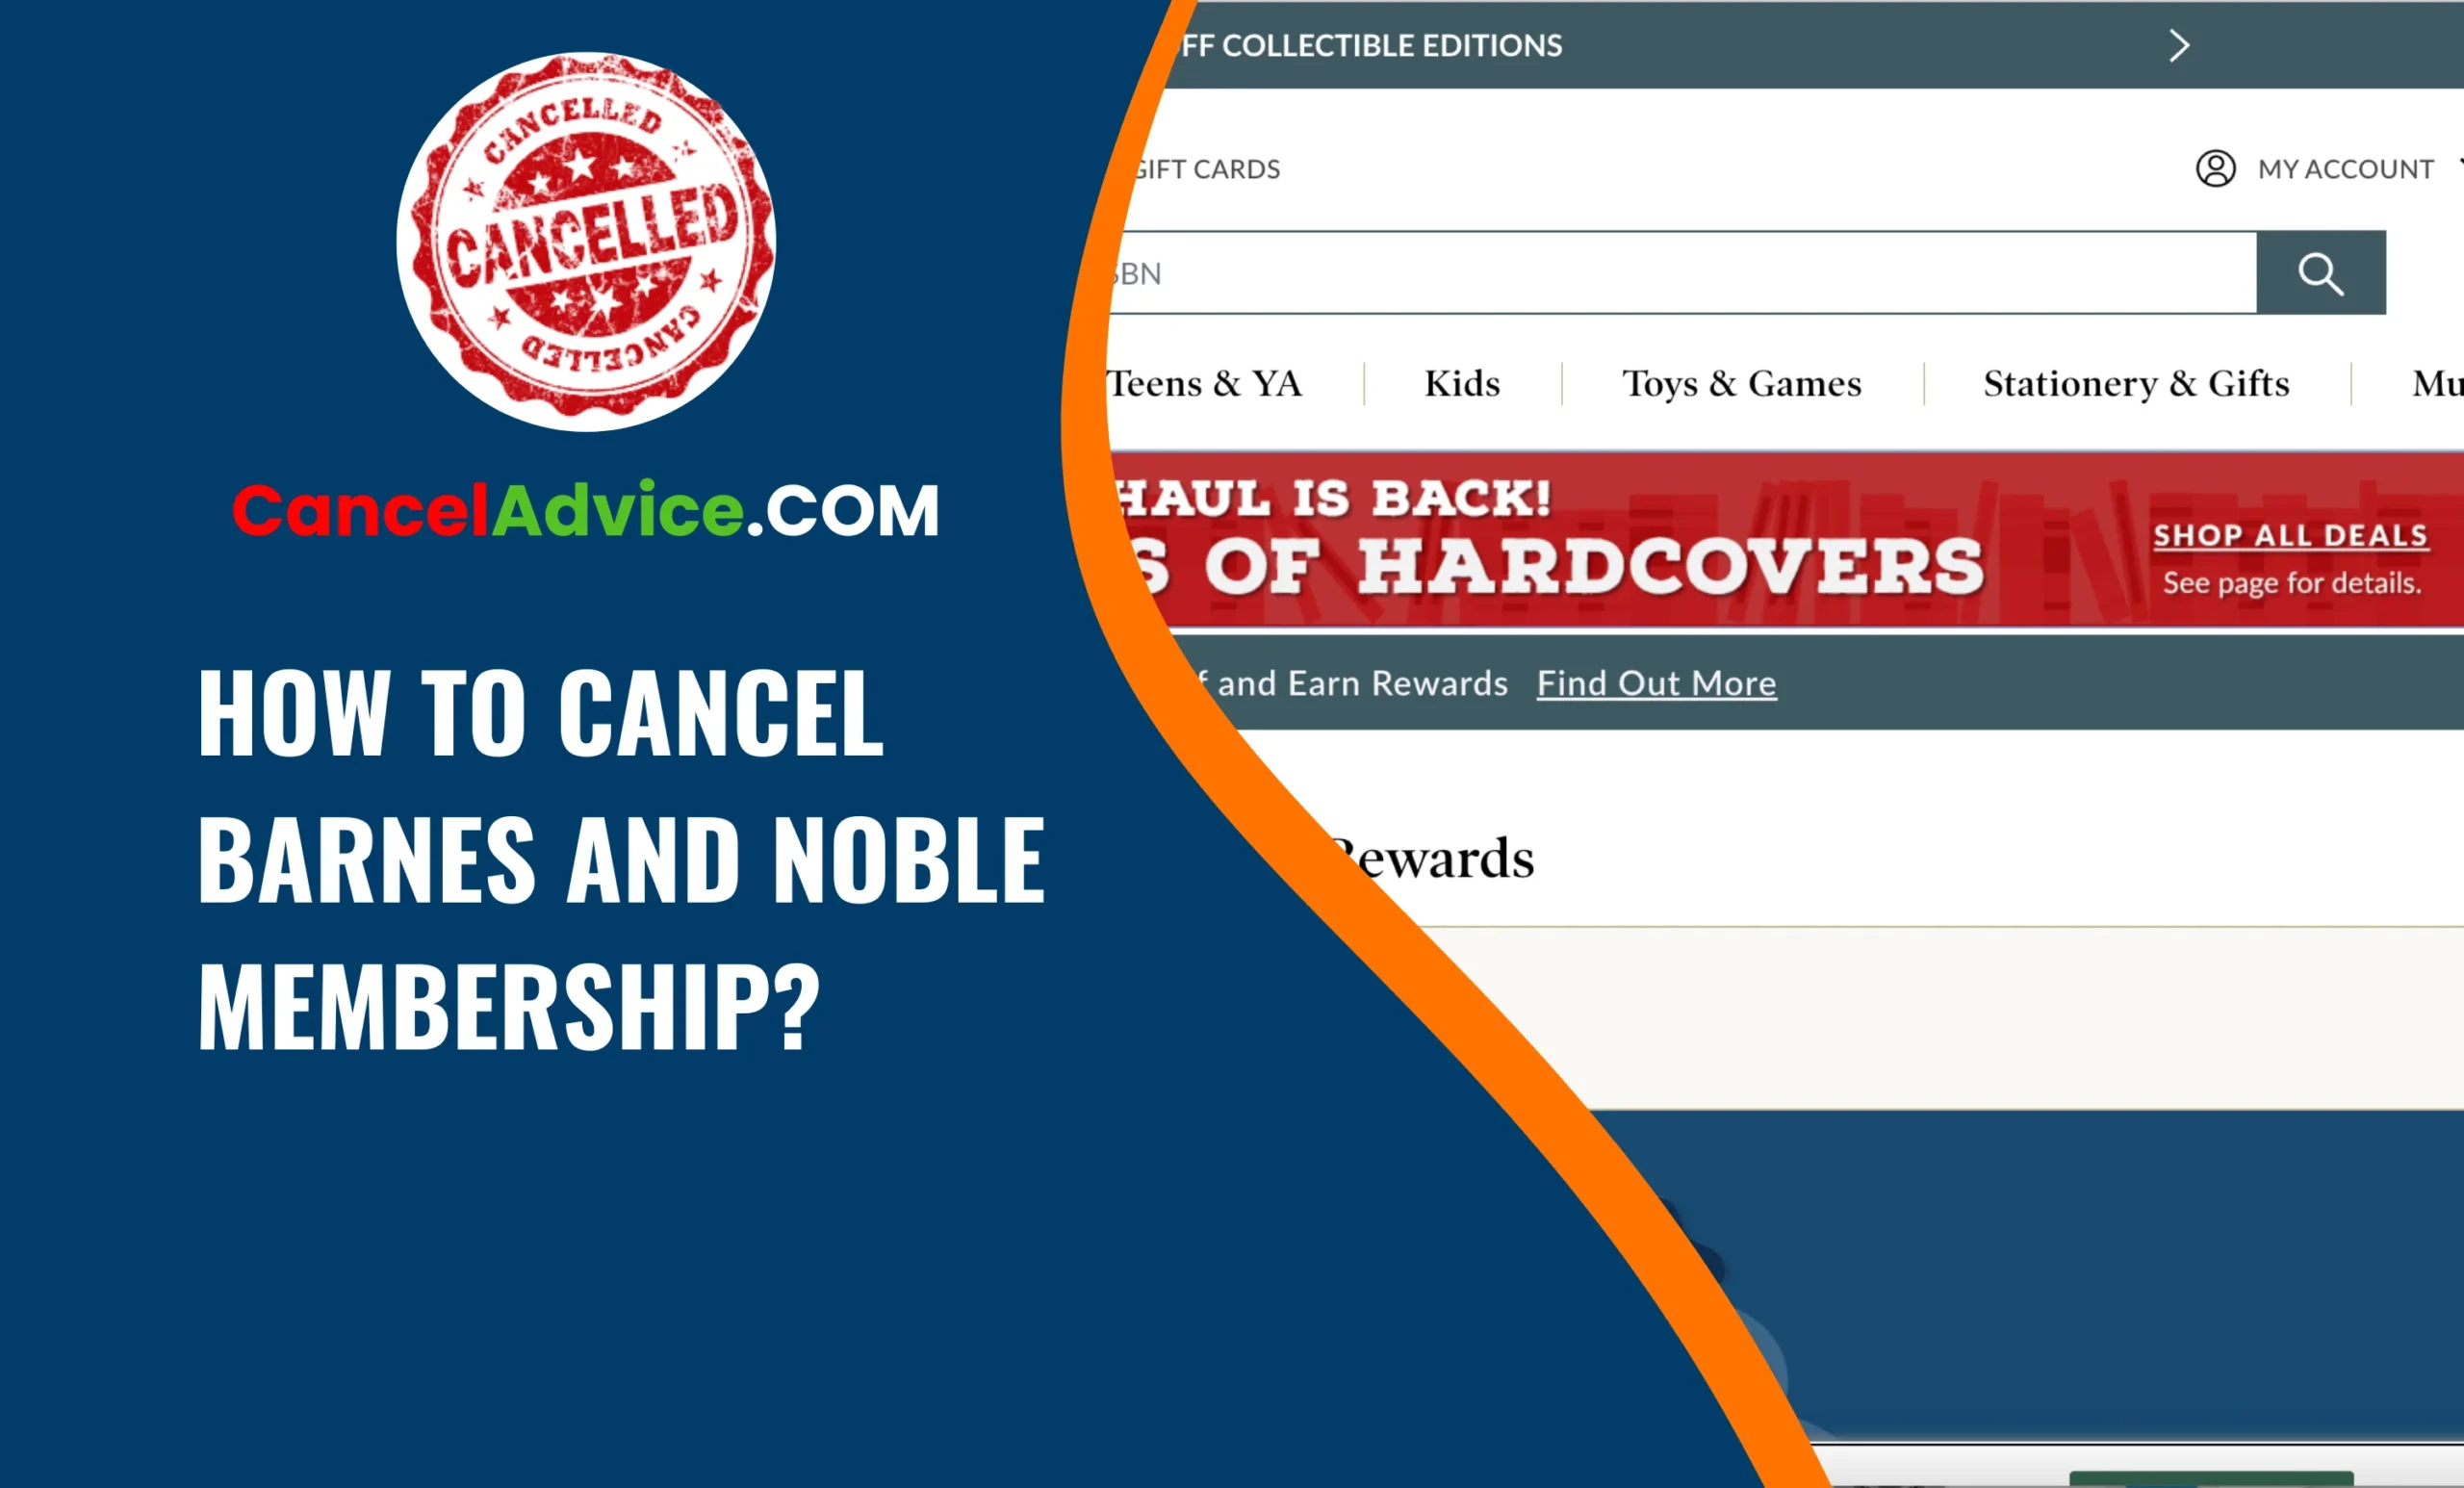 How to Cancel Barnes and Noble Membership